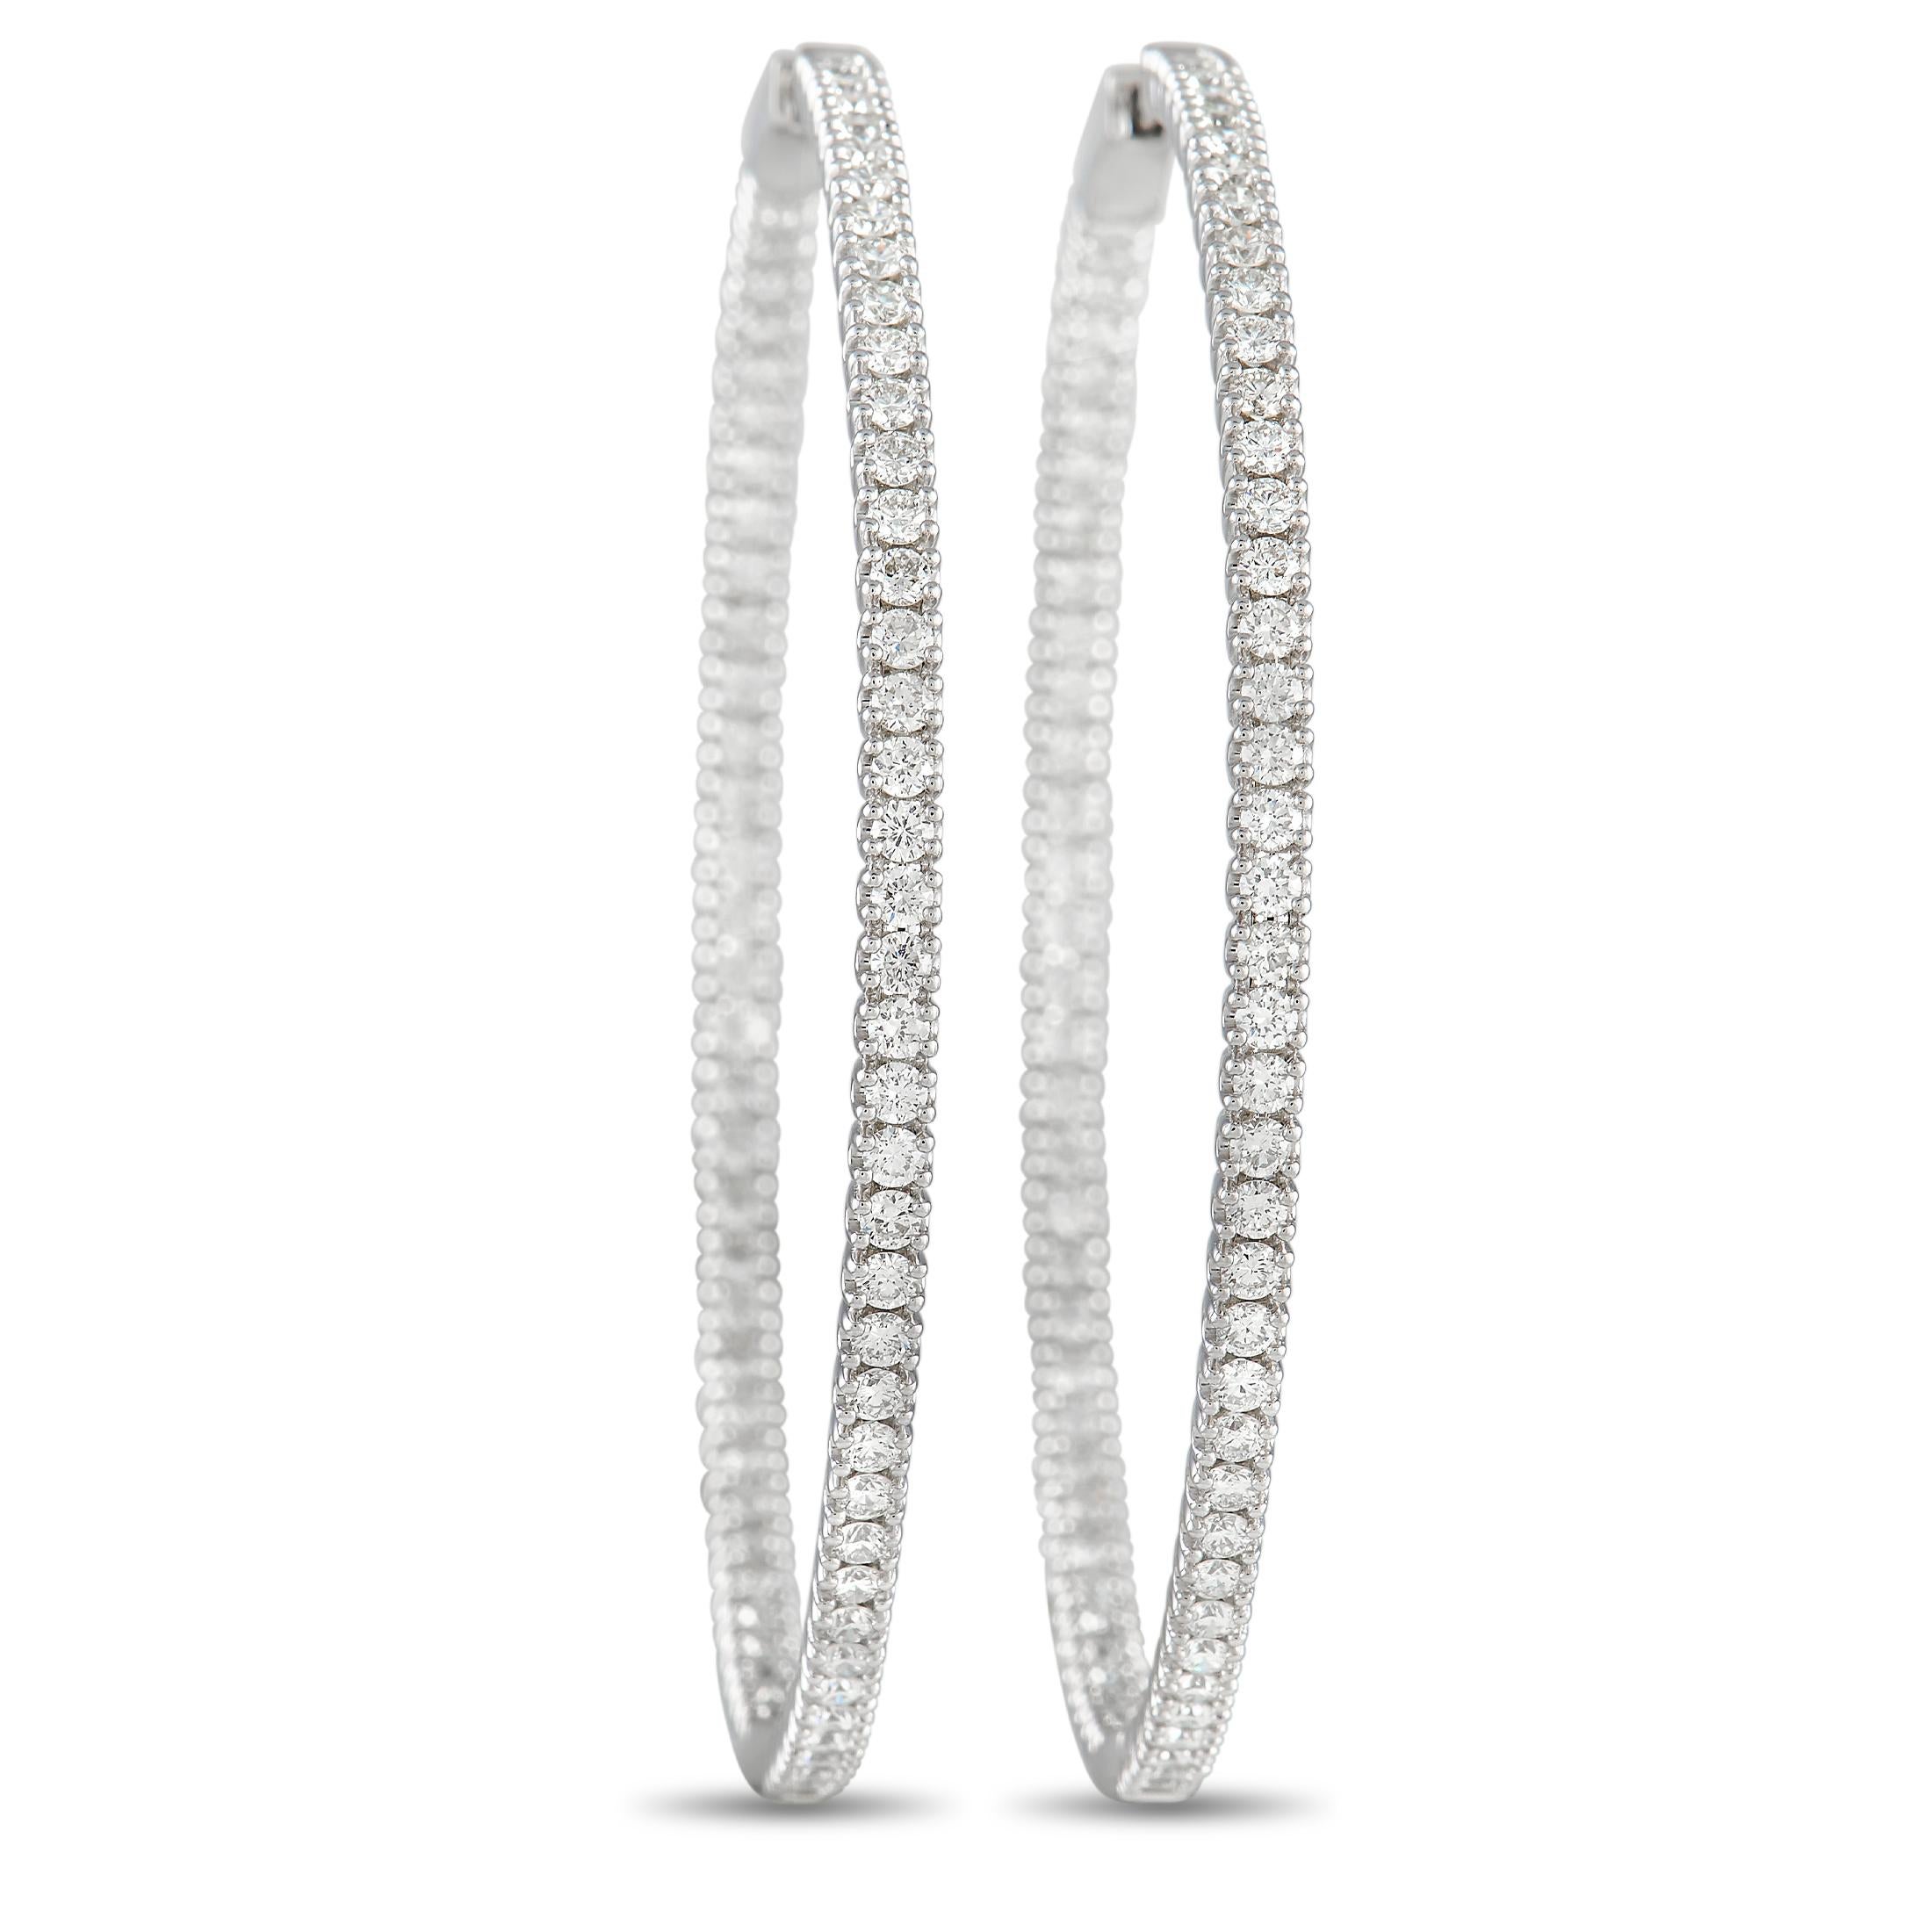 LB Exclusive 14K White Gold 3.74ct Diamond Inside-Out Hoop Earrings In New Condition For Sale In Southampton, PA